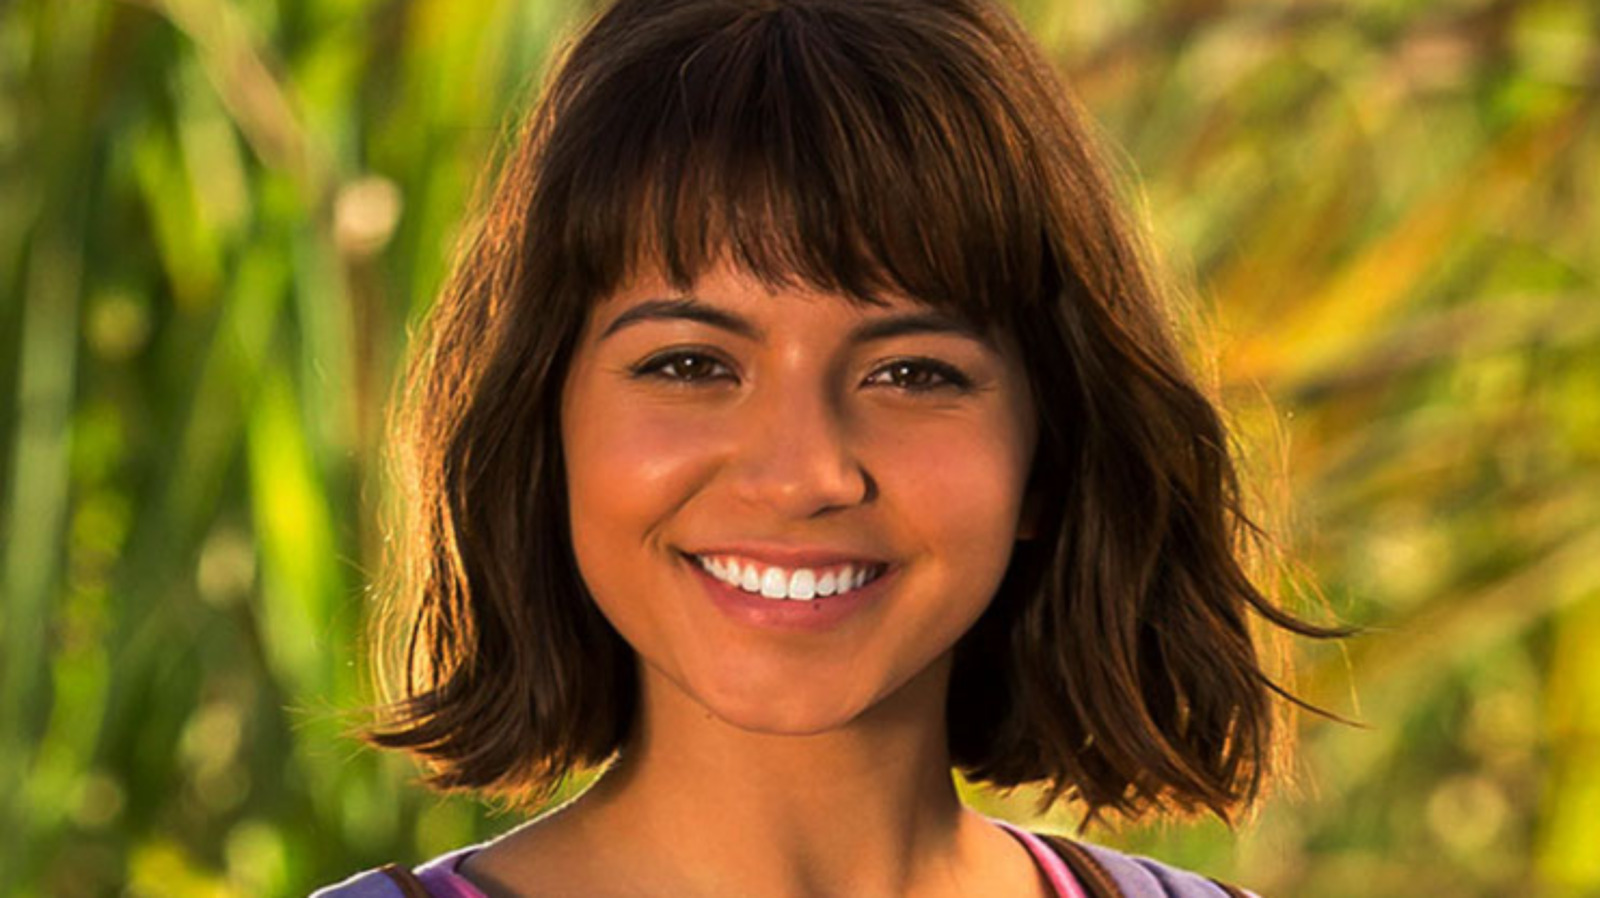 Dora The Explorer 2 Release Date Cast And Plot What We Know So Far